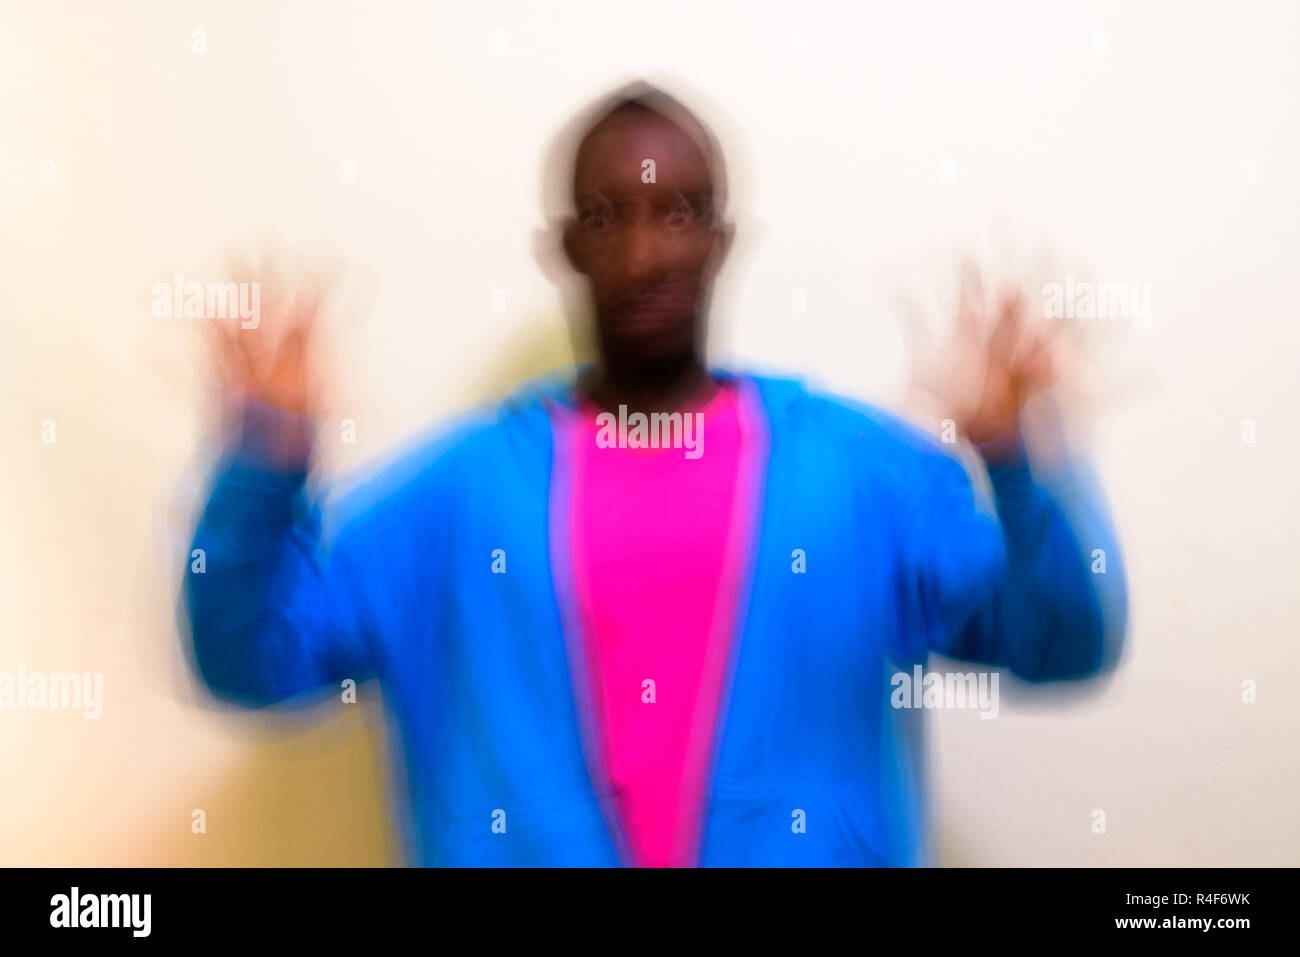 Blurred long exposure shot of young African man against white background Stock Photo